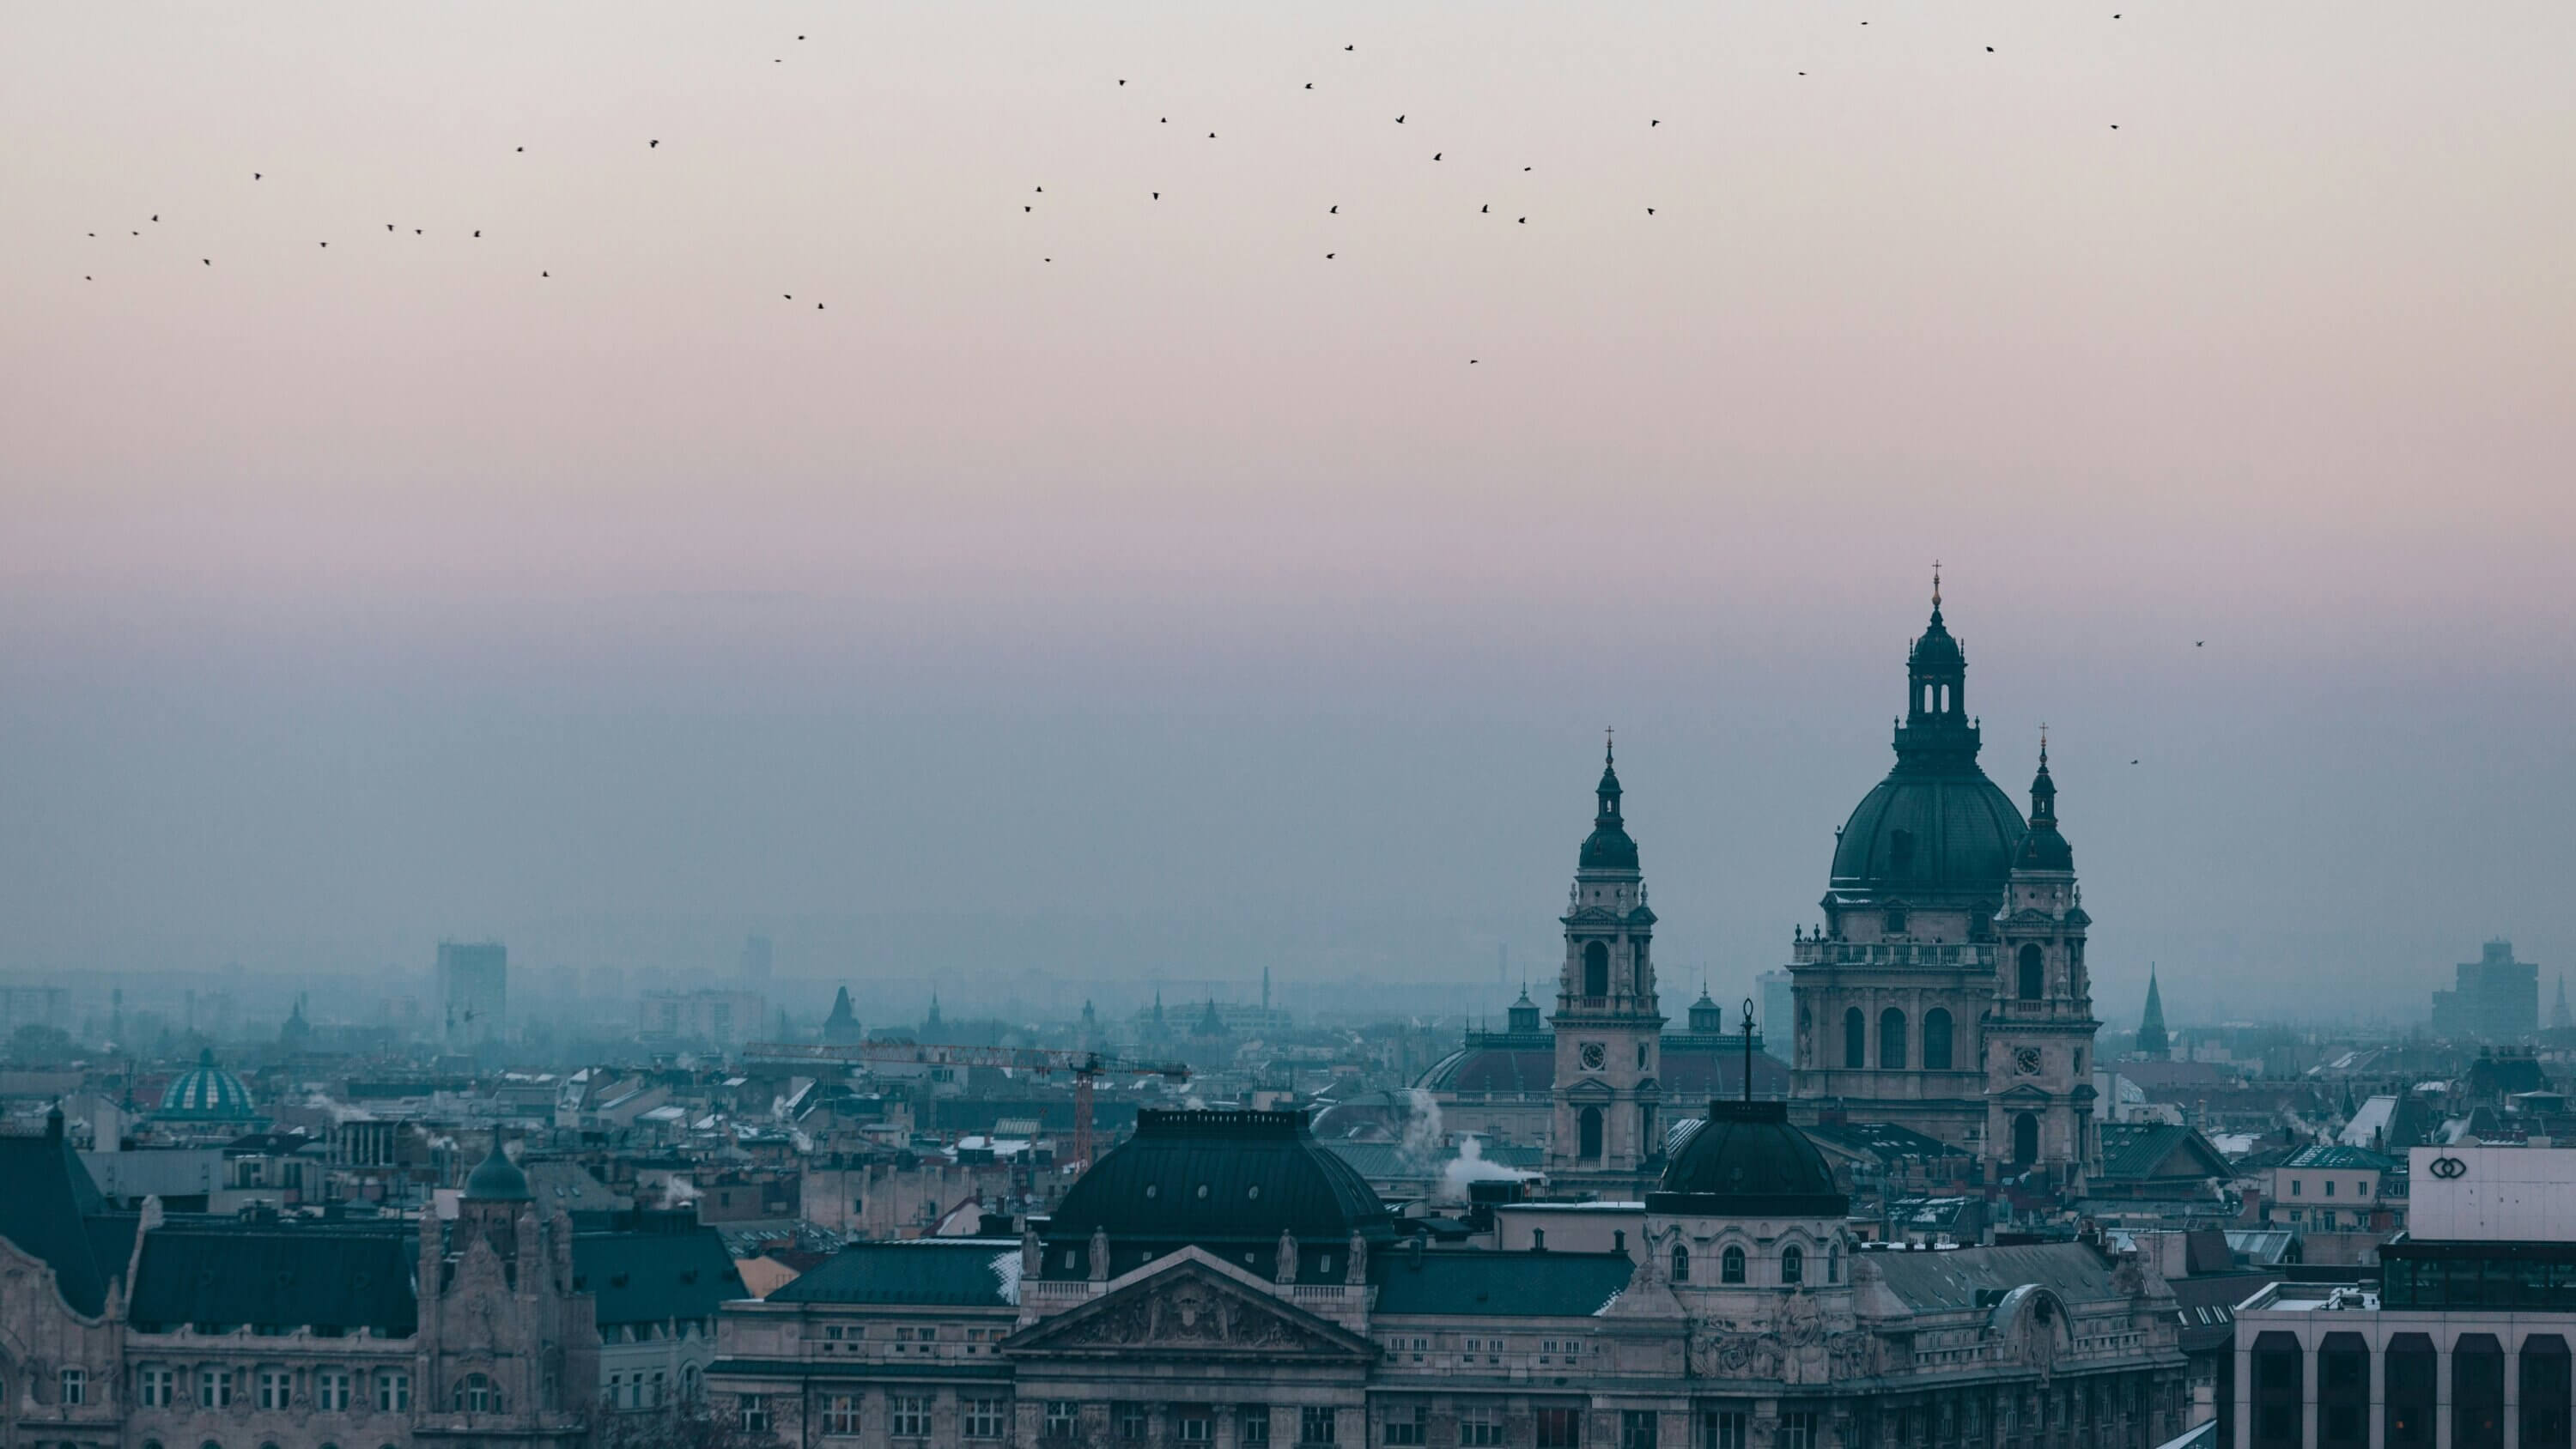 A view of Budapest city during dusk with a flock of birds flying above